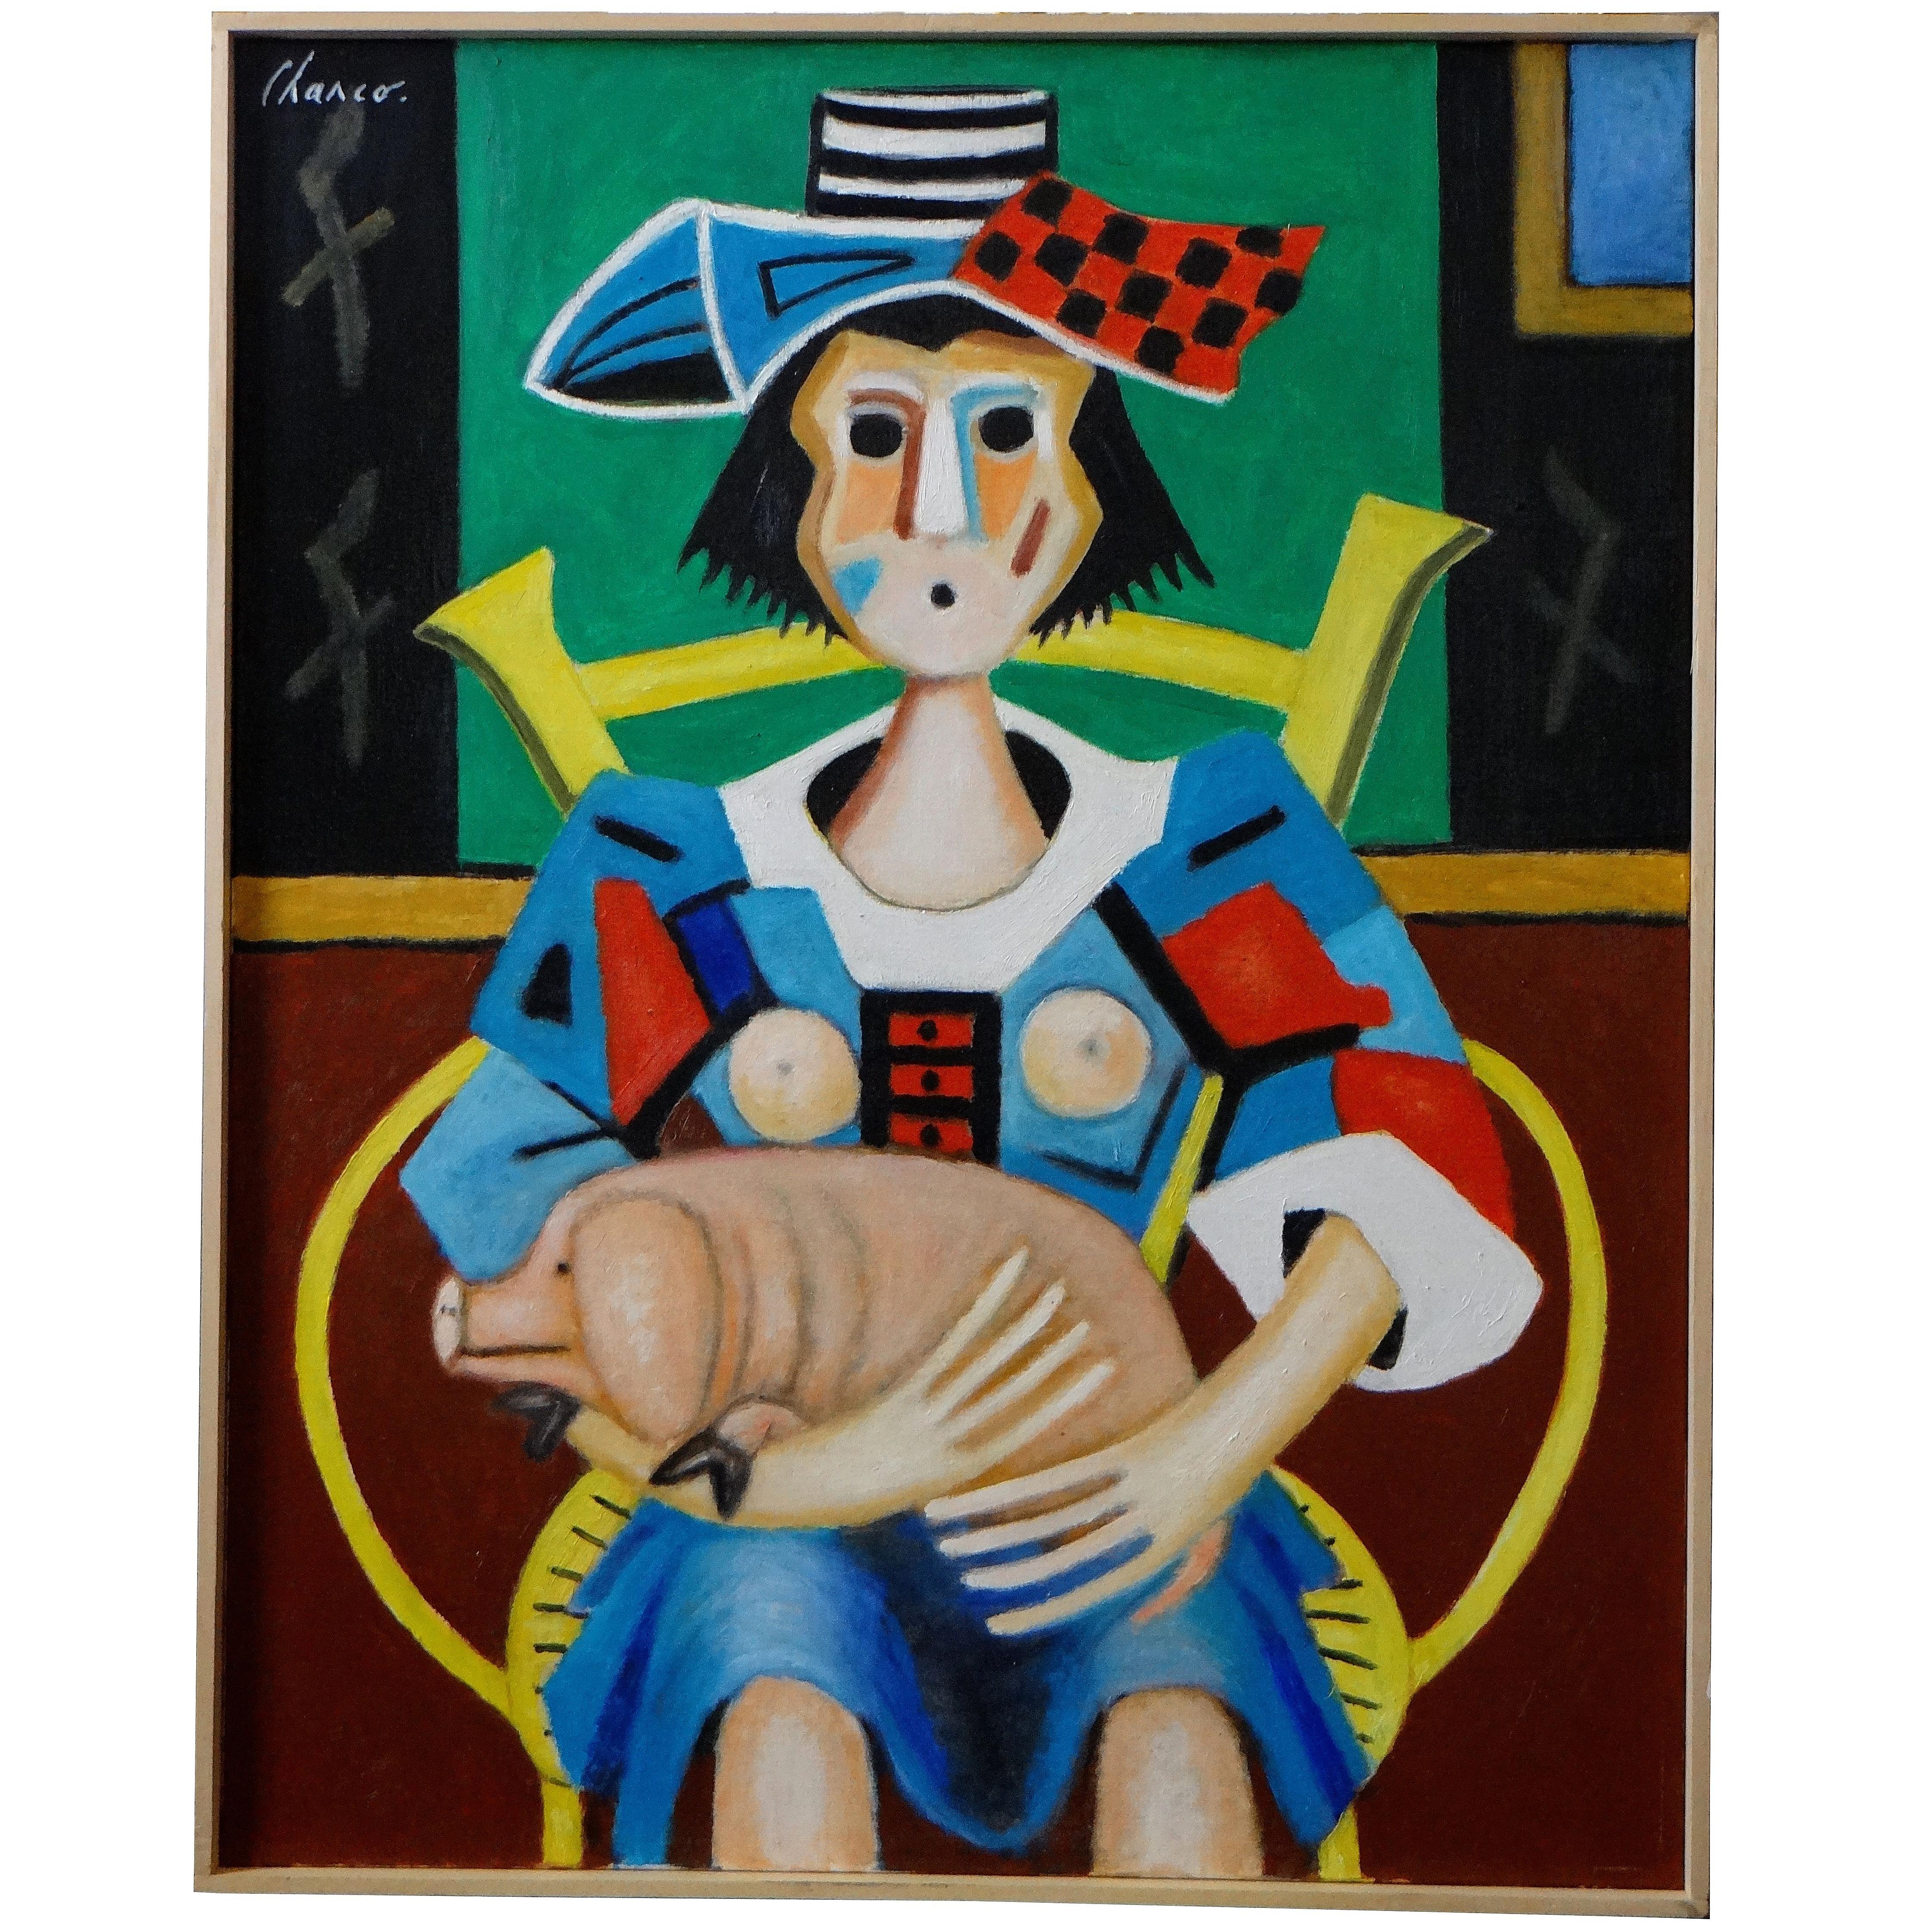 Roland Chanco, Painting "The Piglet", 2000 For Sale